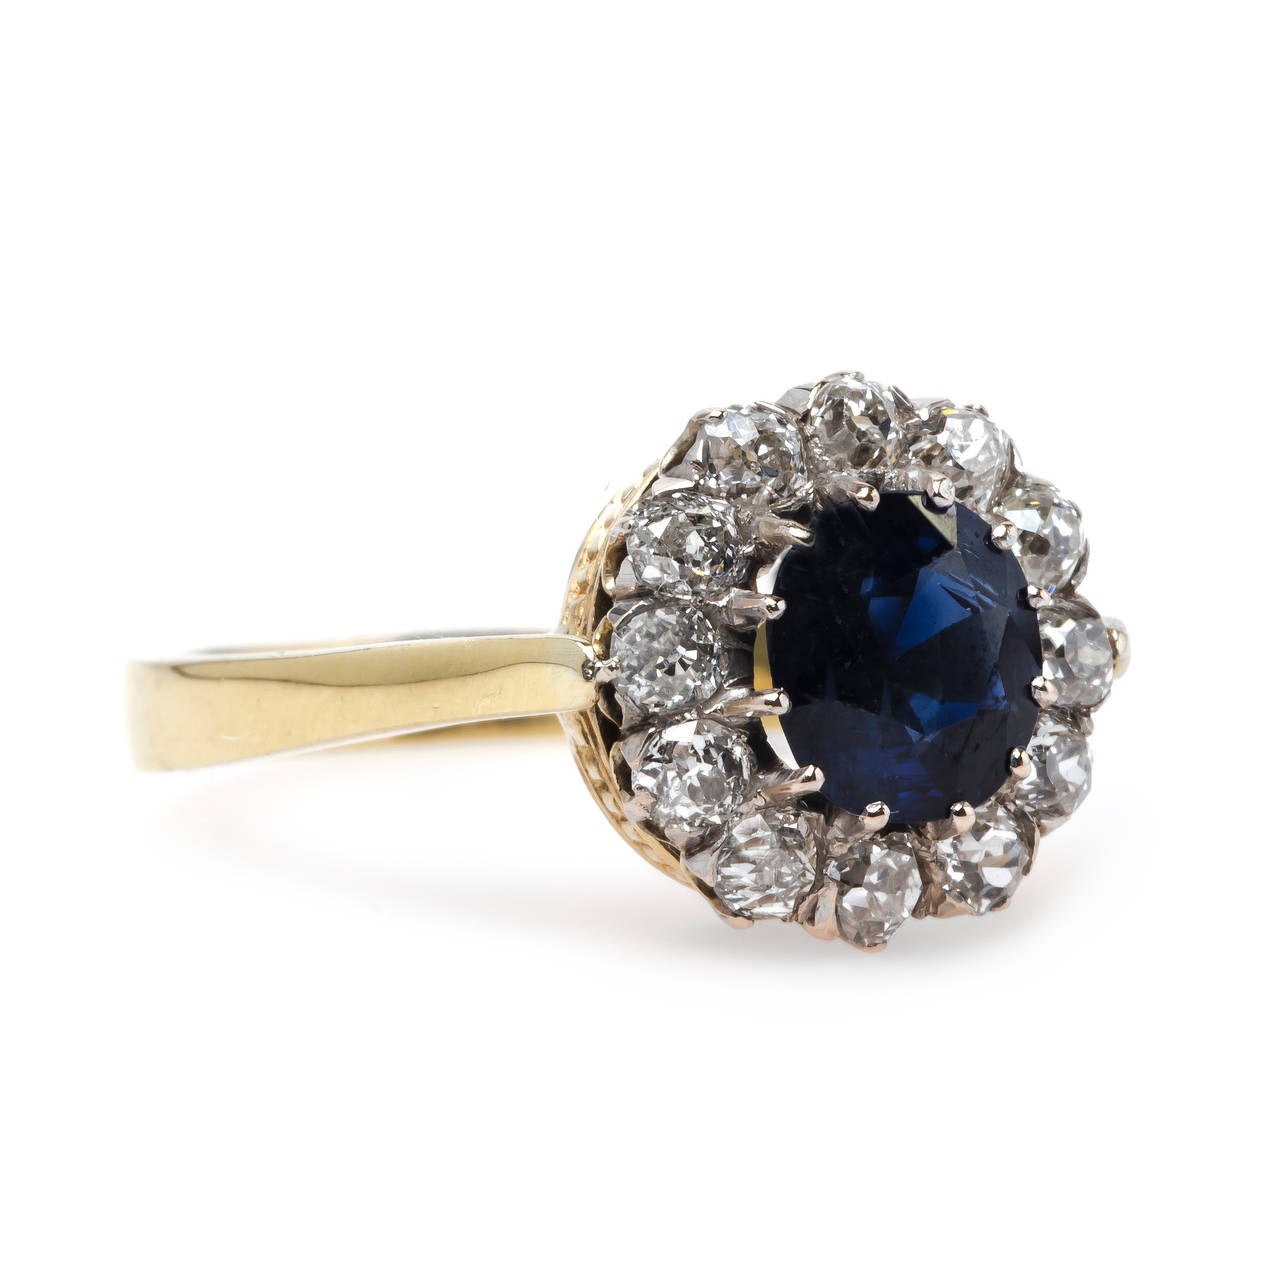 Lone Hill is an impressive authentic Victorian era (circa 1885) sapphire and diamond engagement ring made from 18k yellow gold. This dignified ring features an unheated natural sapphire gauged at 1.20cts accompanied by a Guild Laboratories